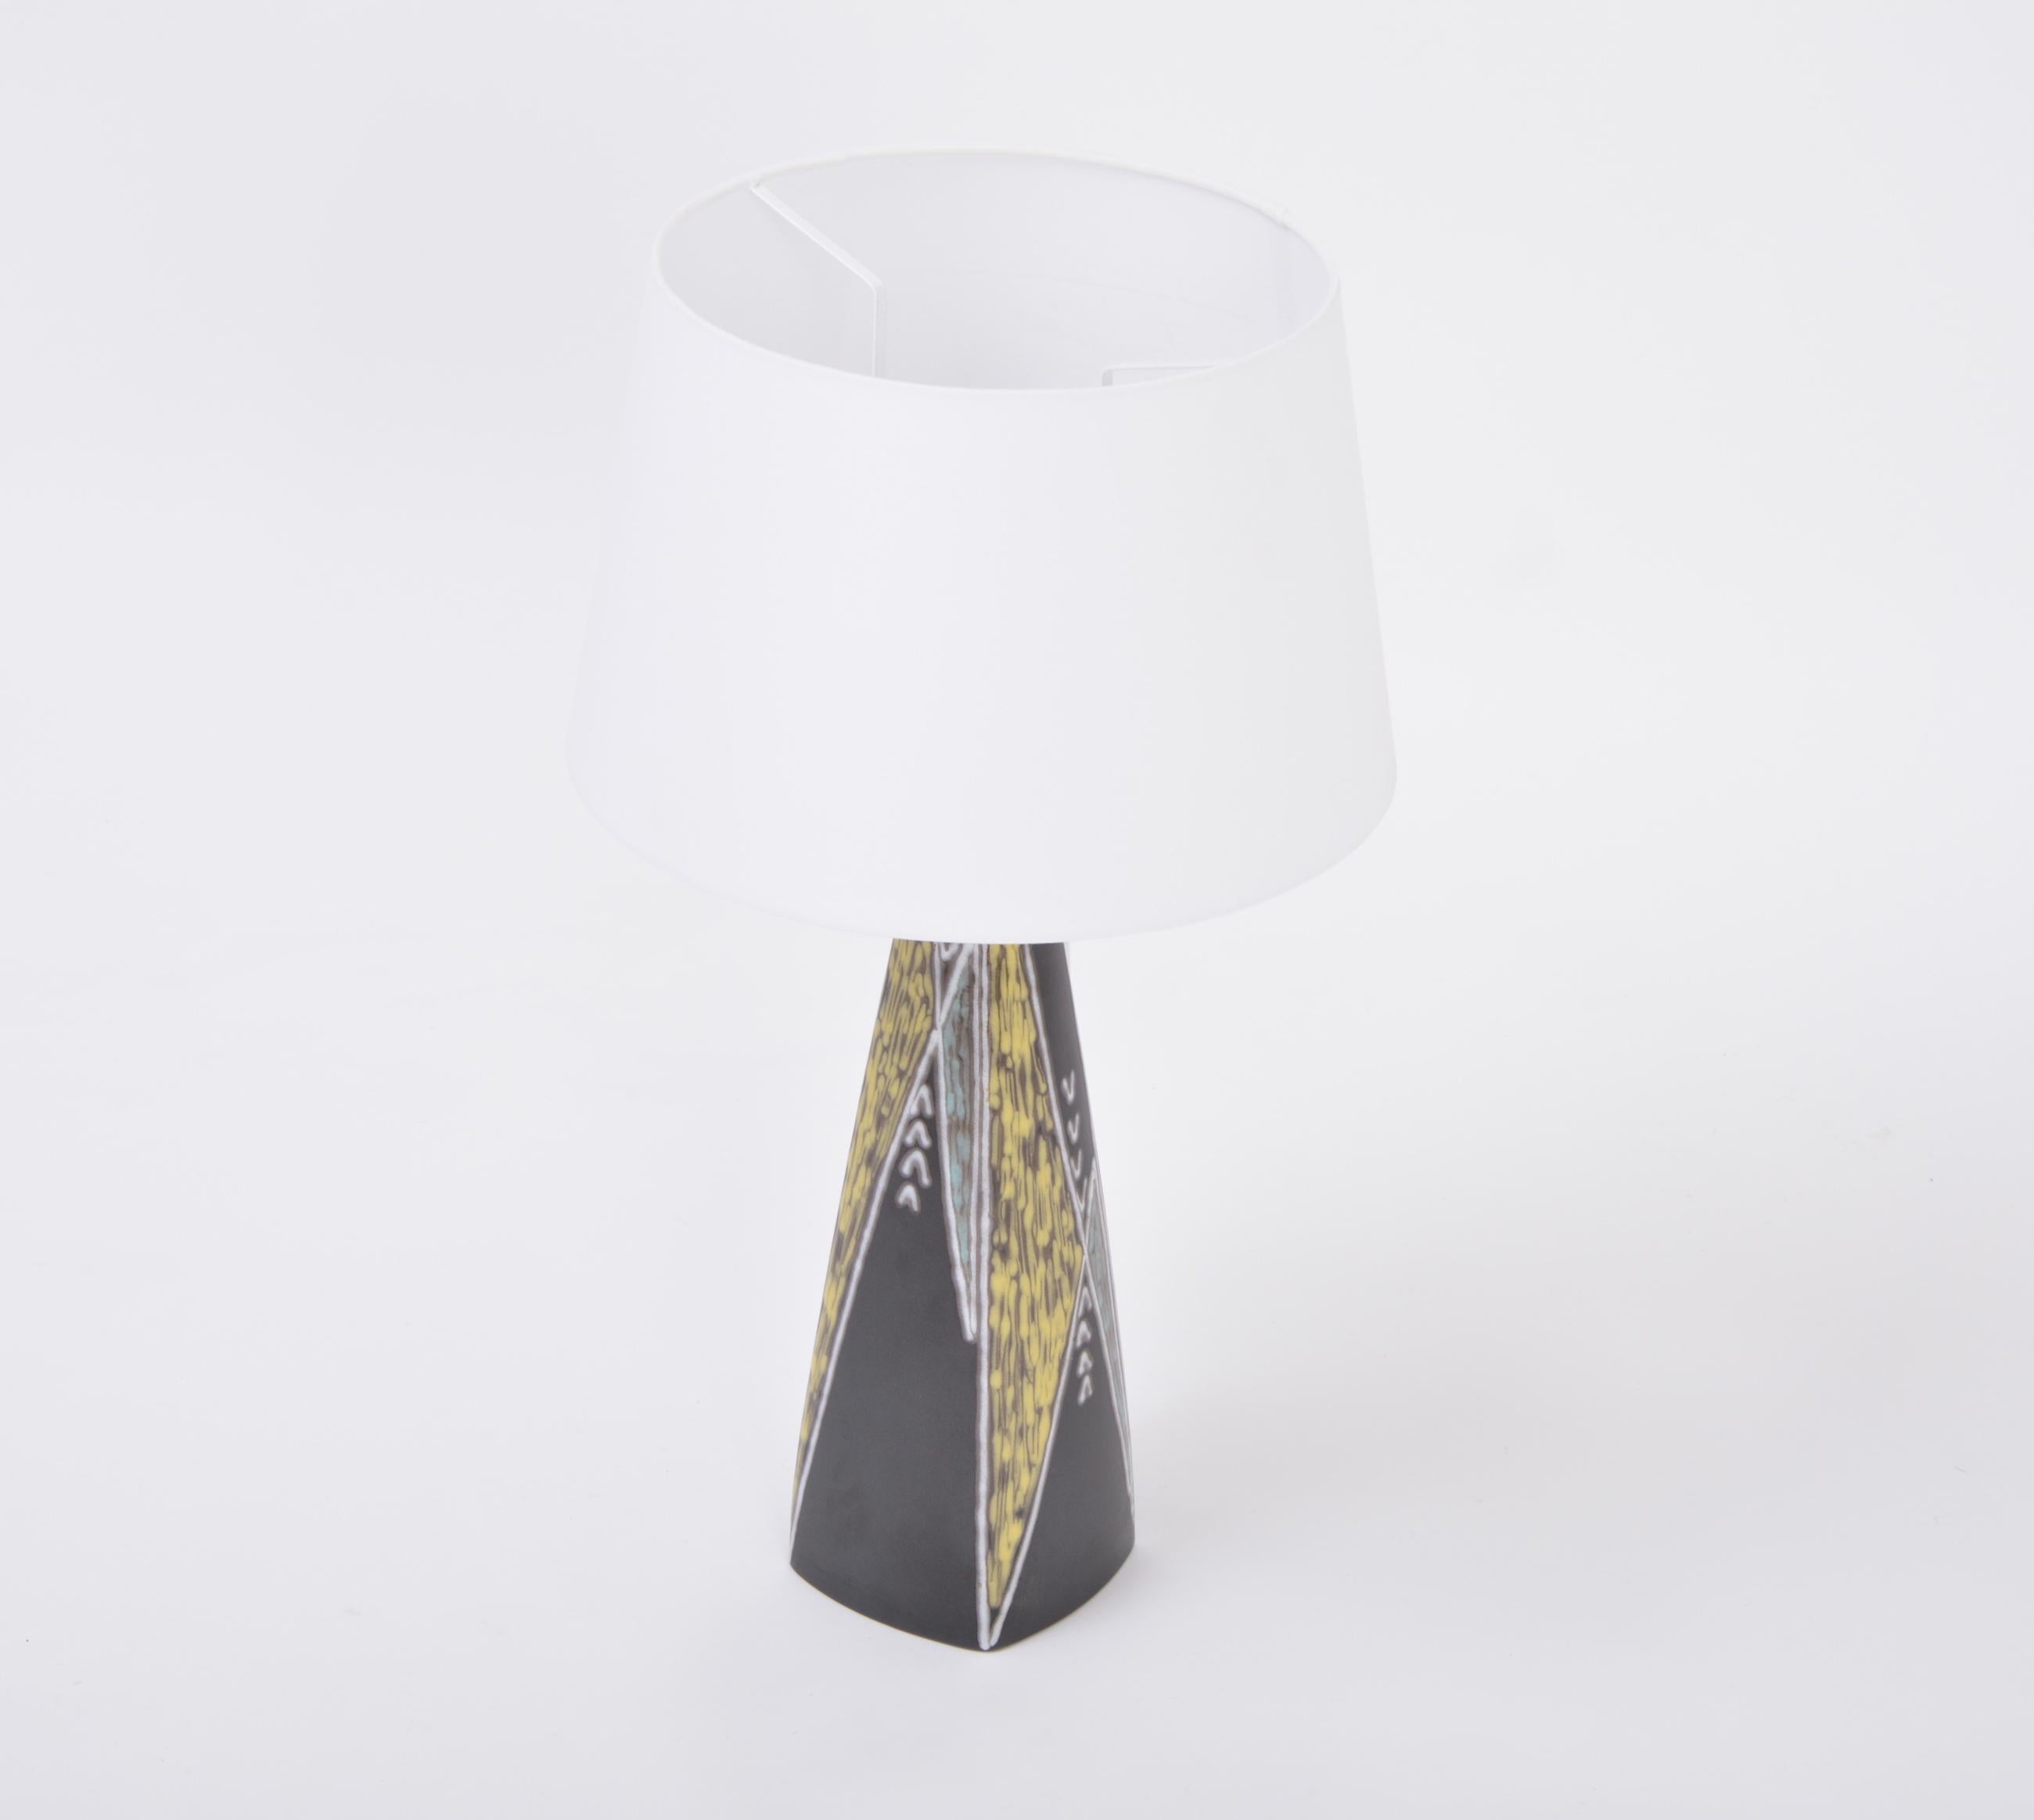 Tall black Danish midcentury ceramic table lamp by Holm Sorensen for Søholm

Beautiful tall table lamp designed by Holm Sørensen and Svend Aage Jensen in 1955 for Søholm, Denmark. The design is from their series 